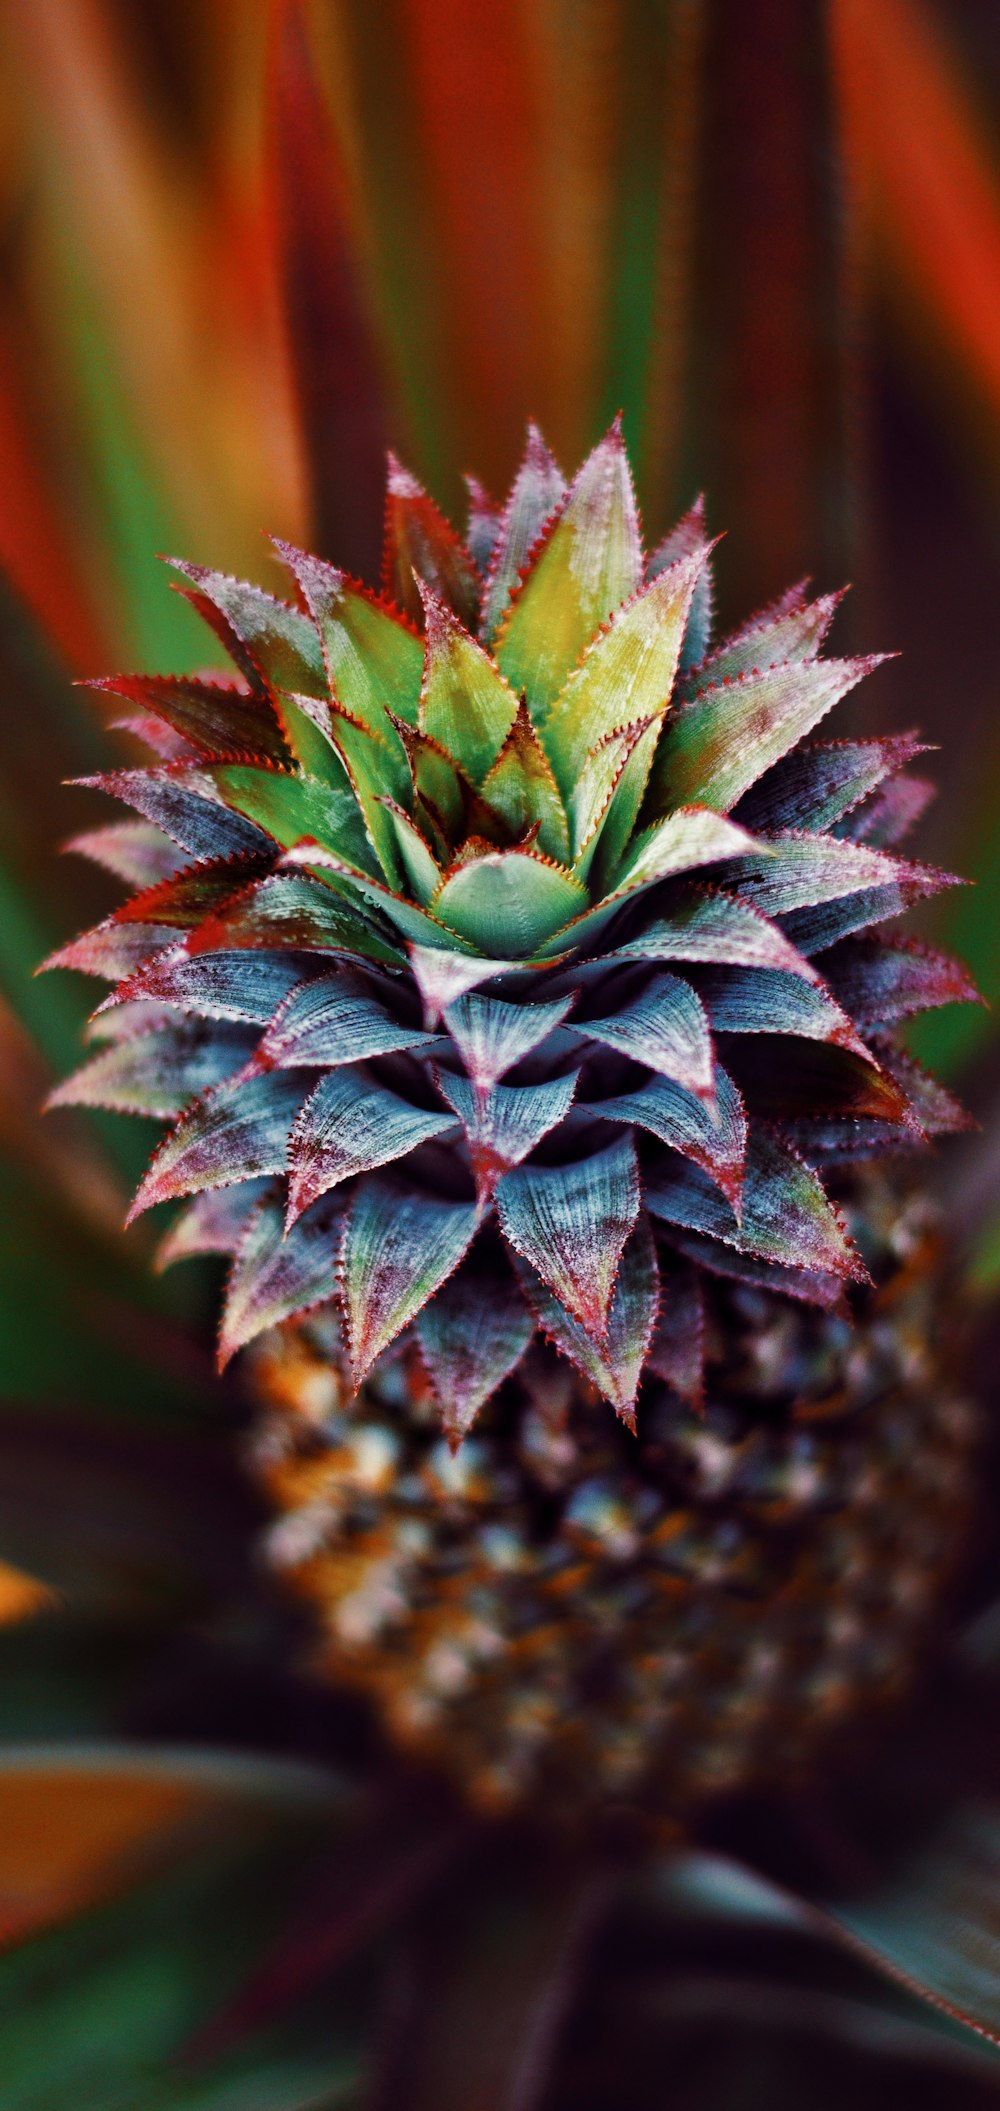 green and brown pineapple fruit